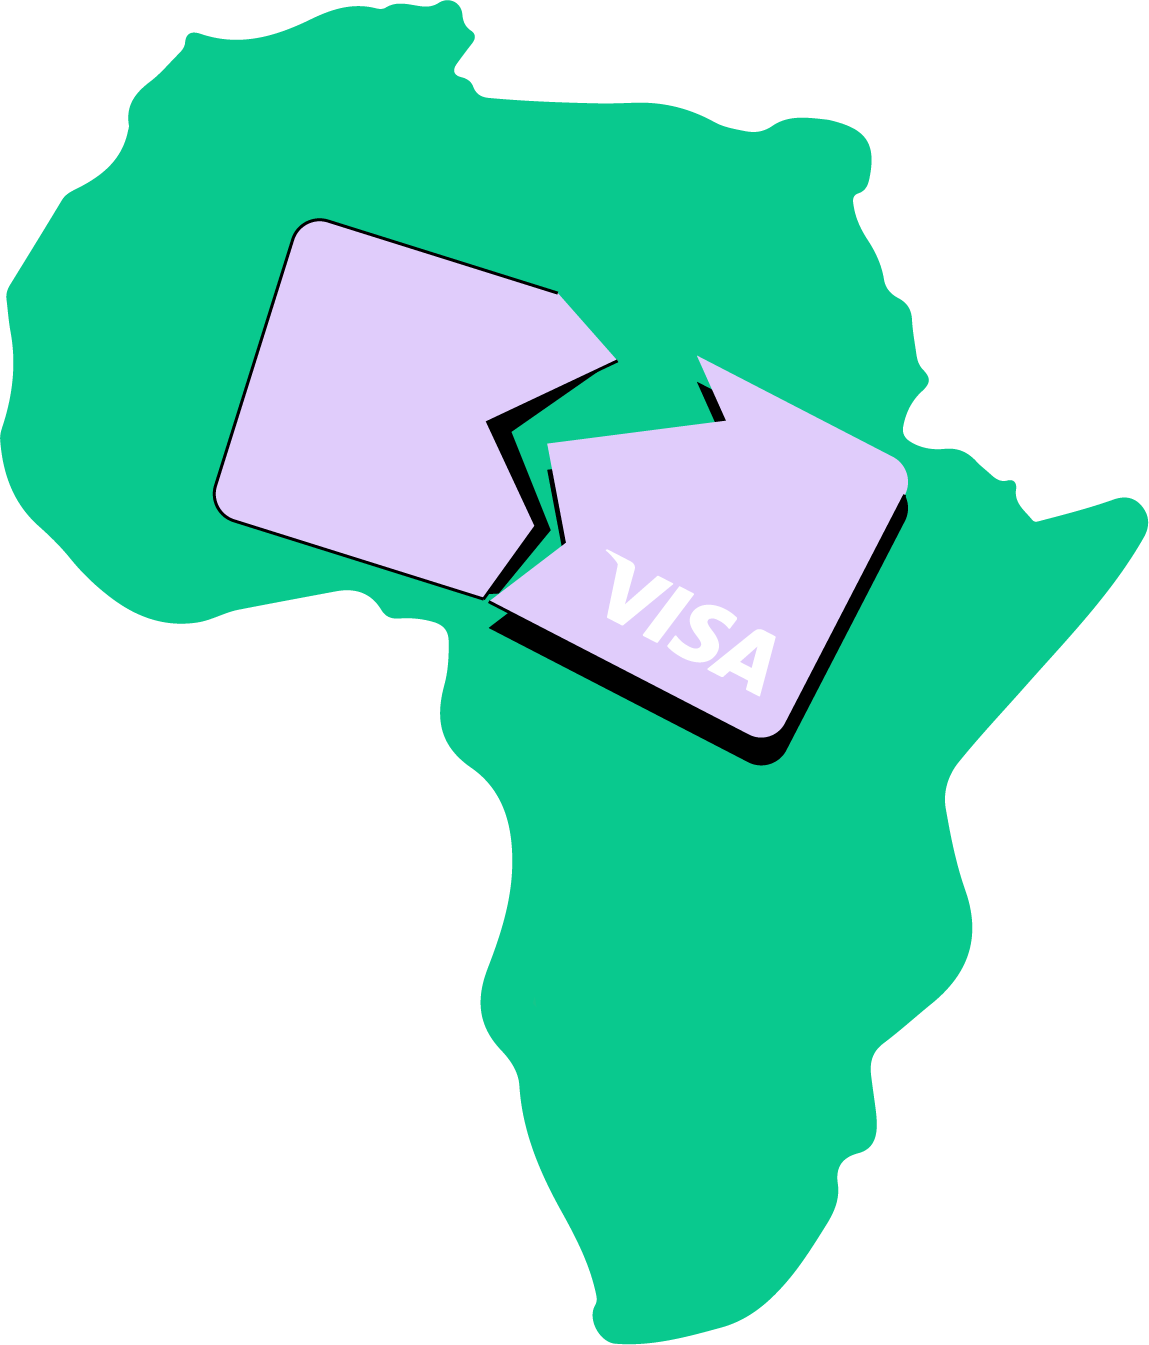 africas map with broken card